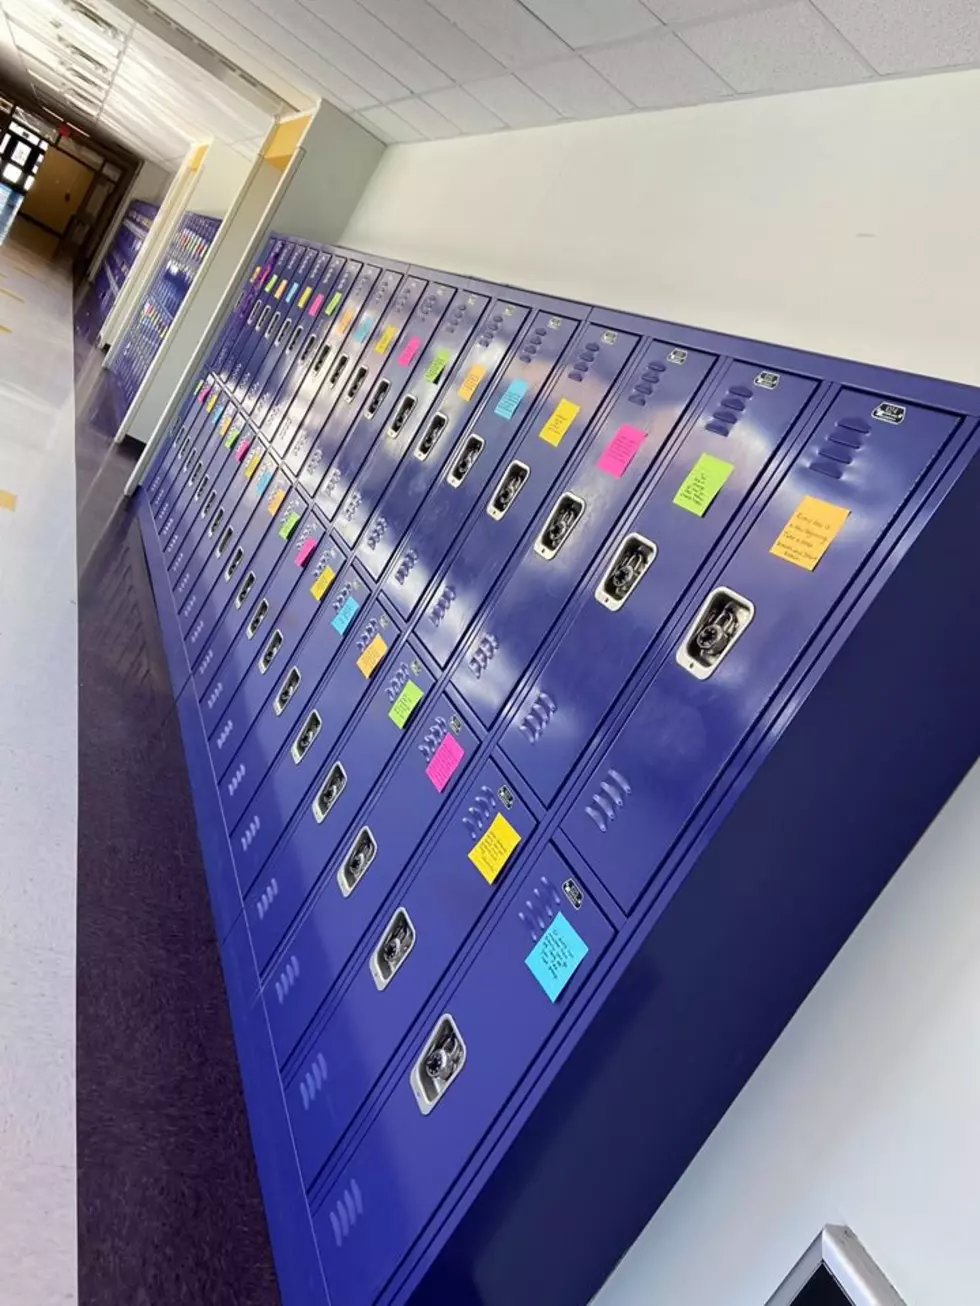 1000’s of Inspirational Notes Appear On Local HS Lockers